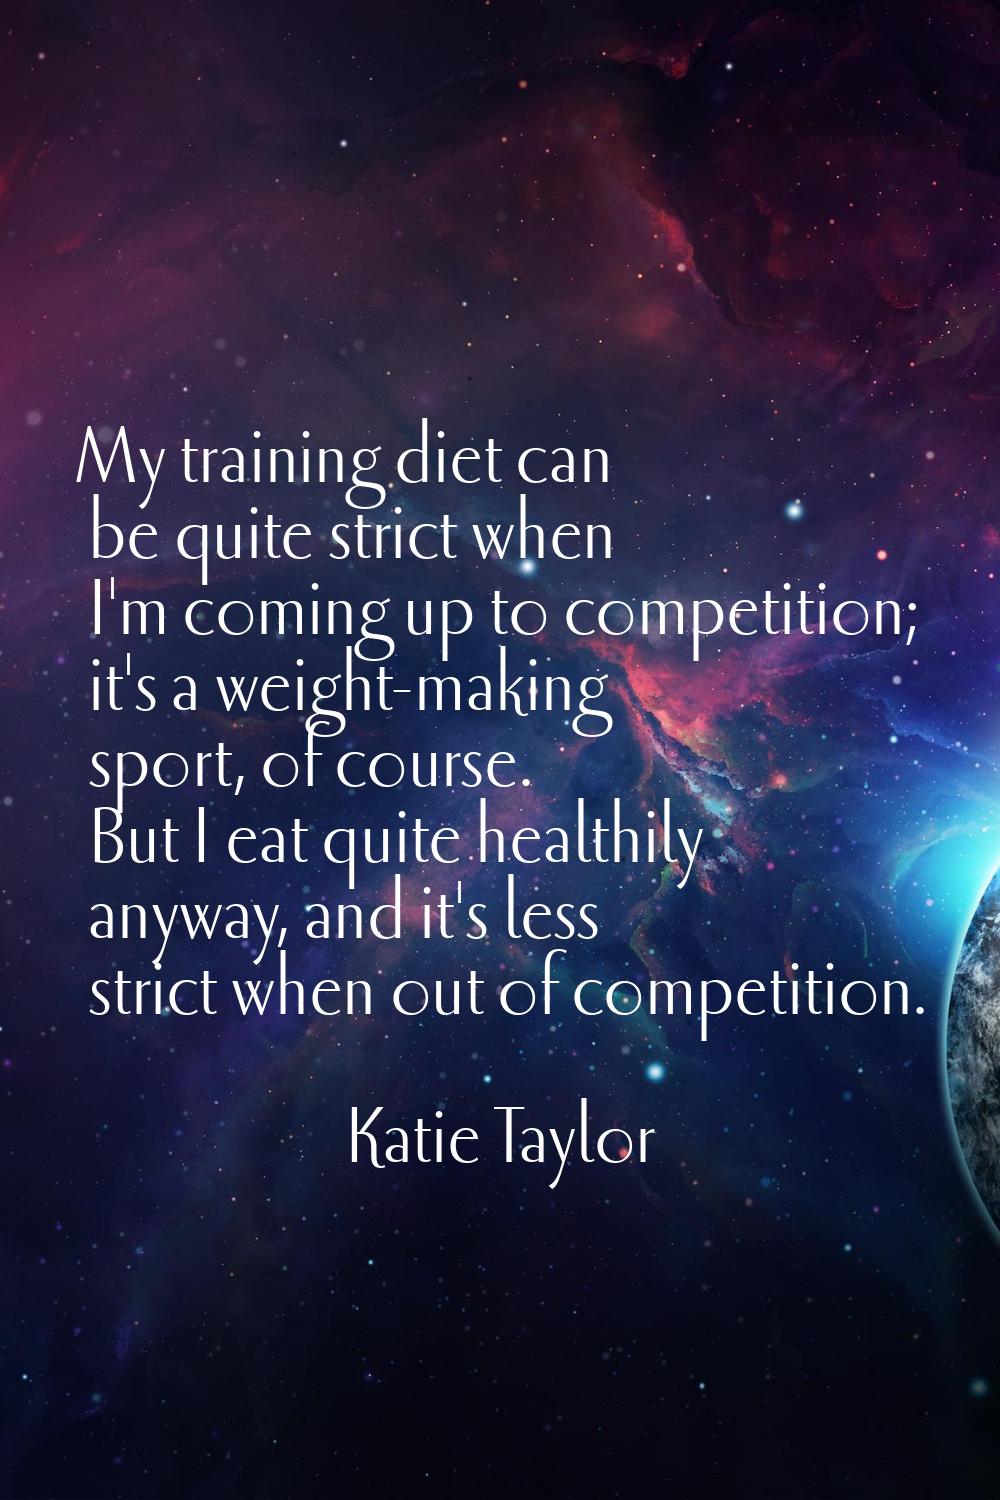 My training diet can be quite strict when I'm coming up to competition; it's a weight-making sport,